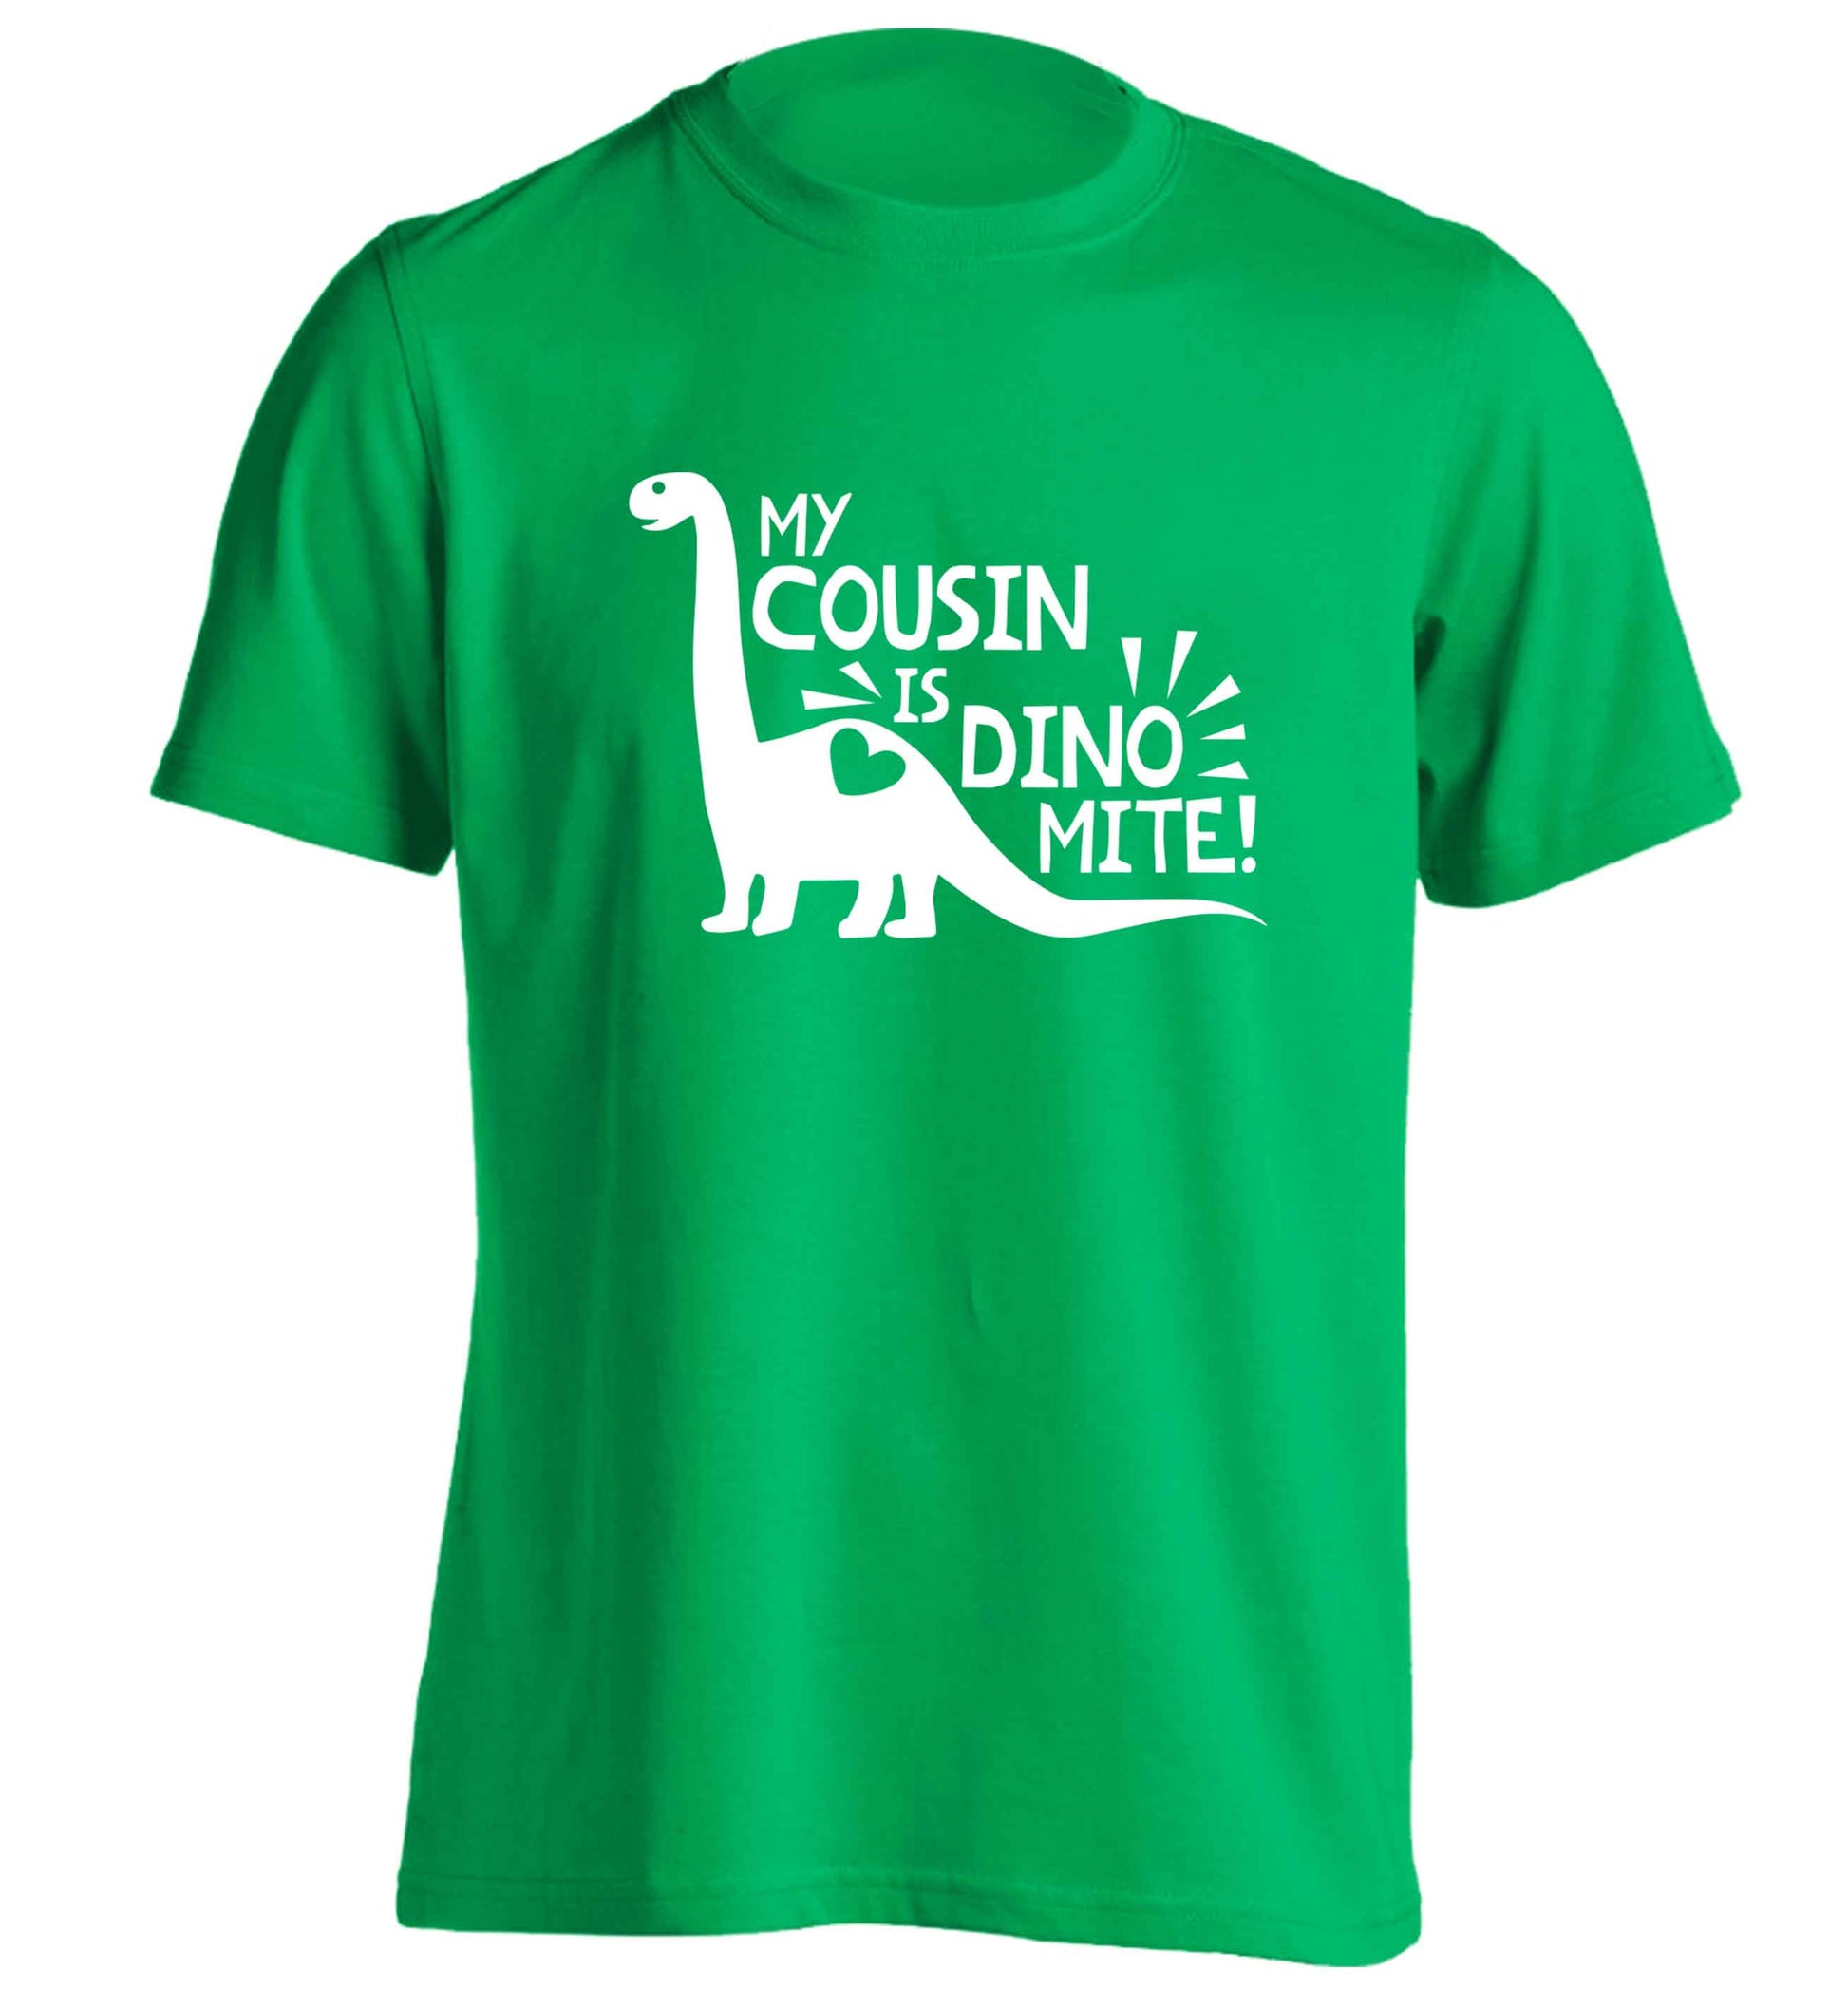 My cousin is dinomite! adults unisex green Tshirt 2XL